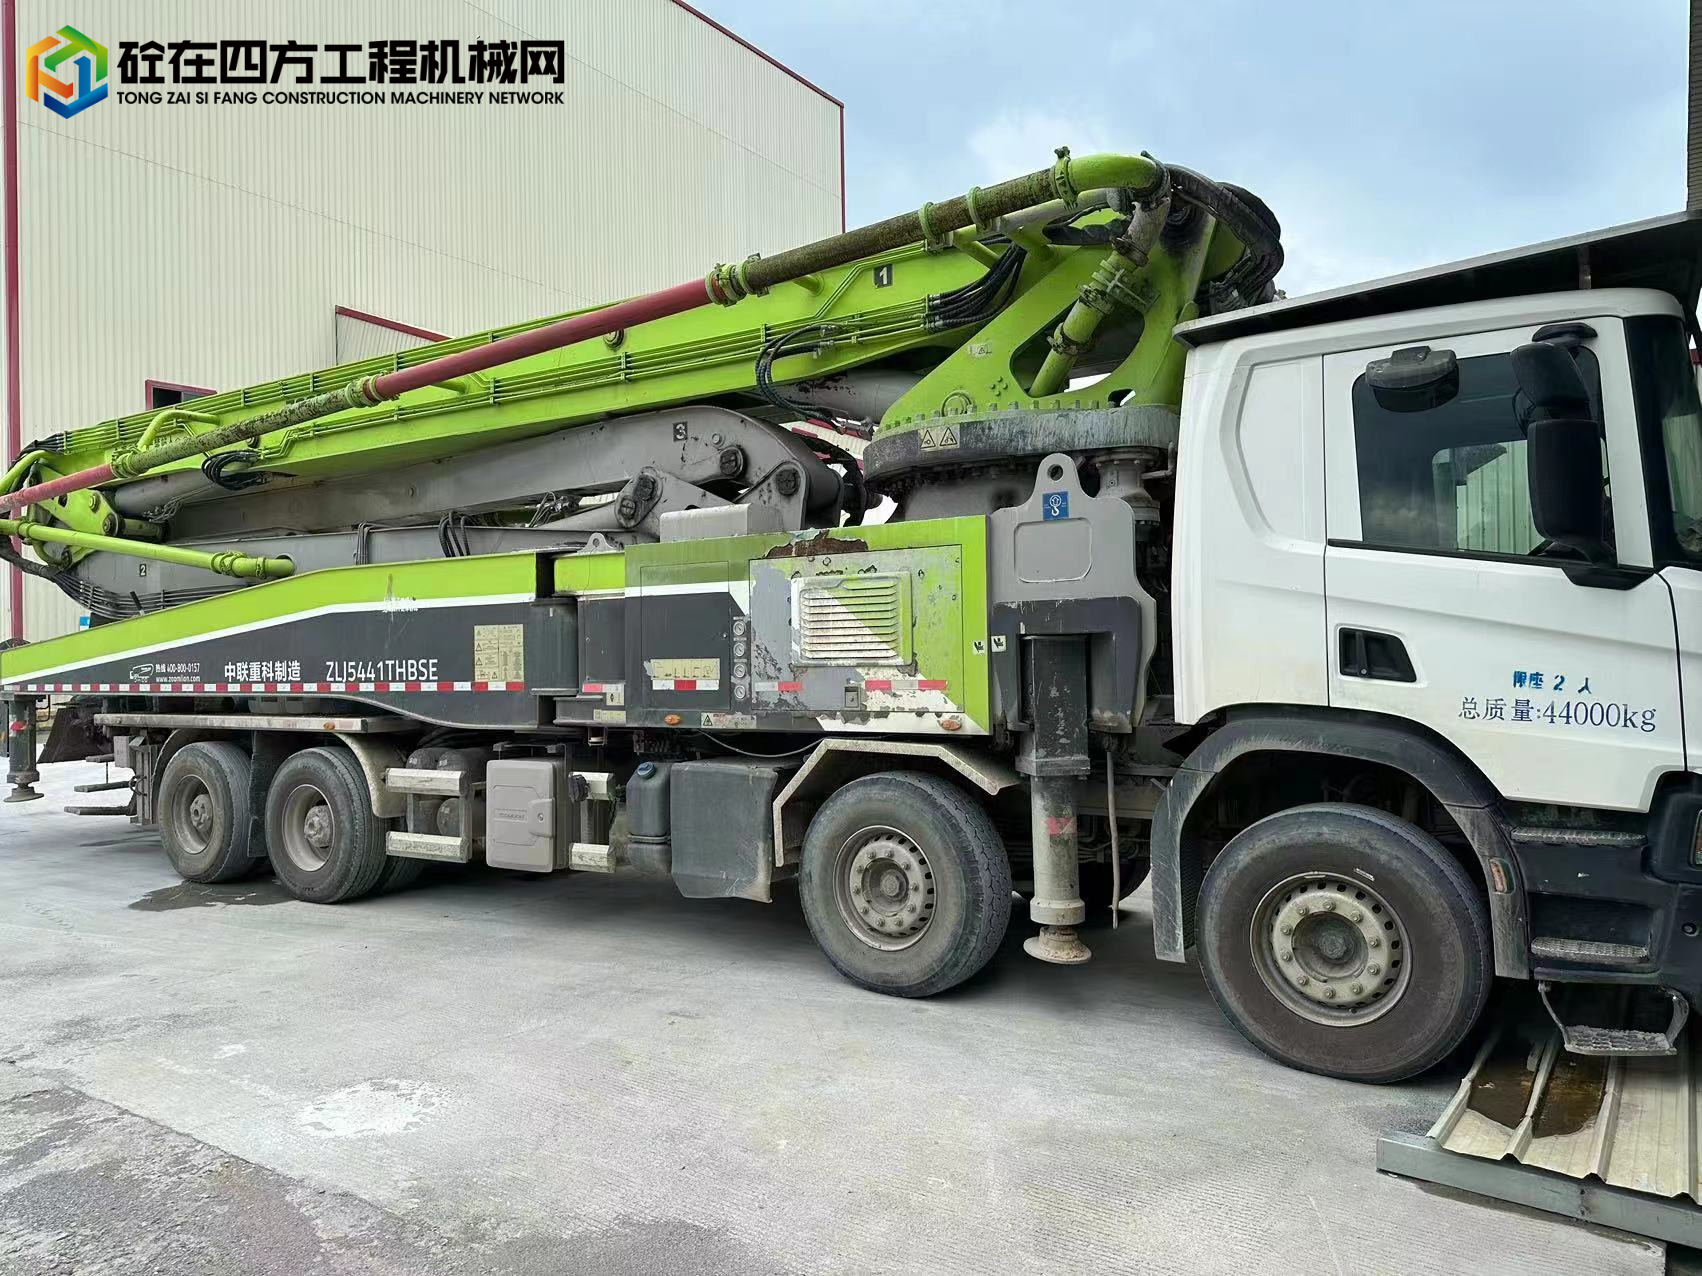 https://images.tongzsf.com/tong/truck_machine/20231121/1655c5caf61dcb.jpg